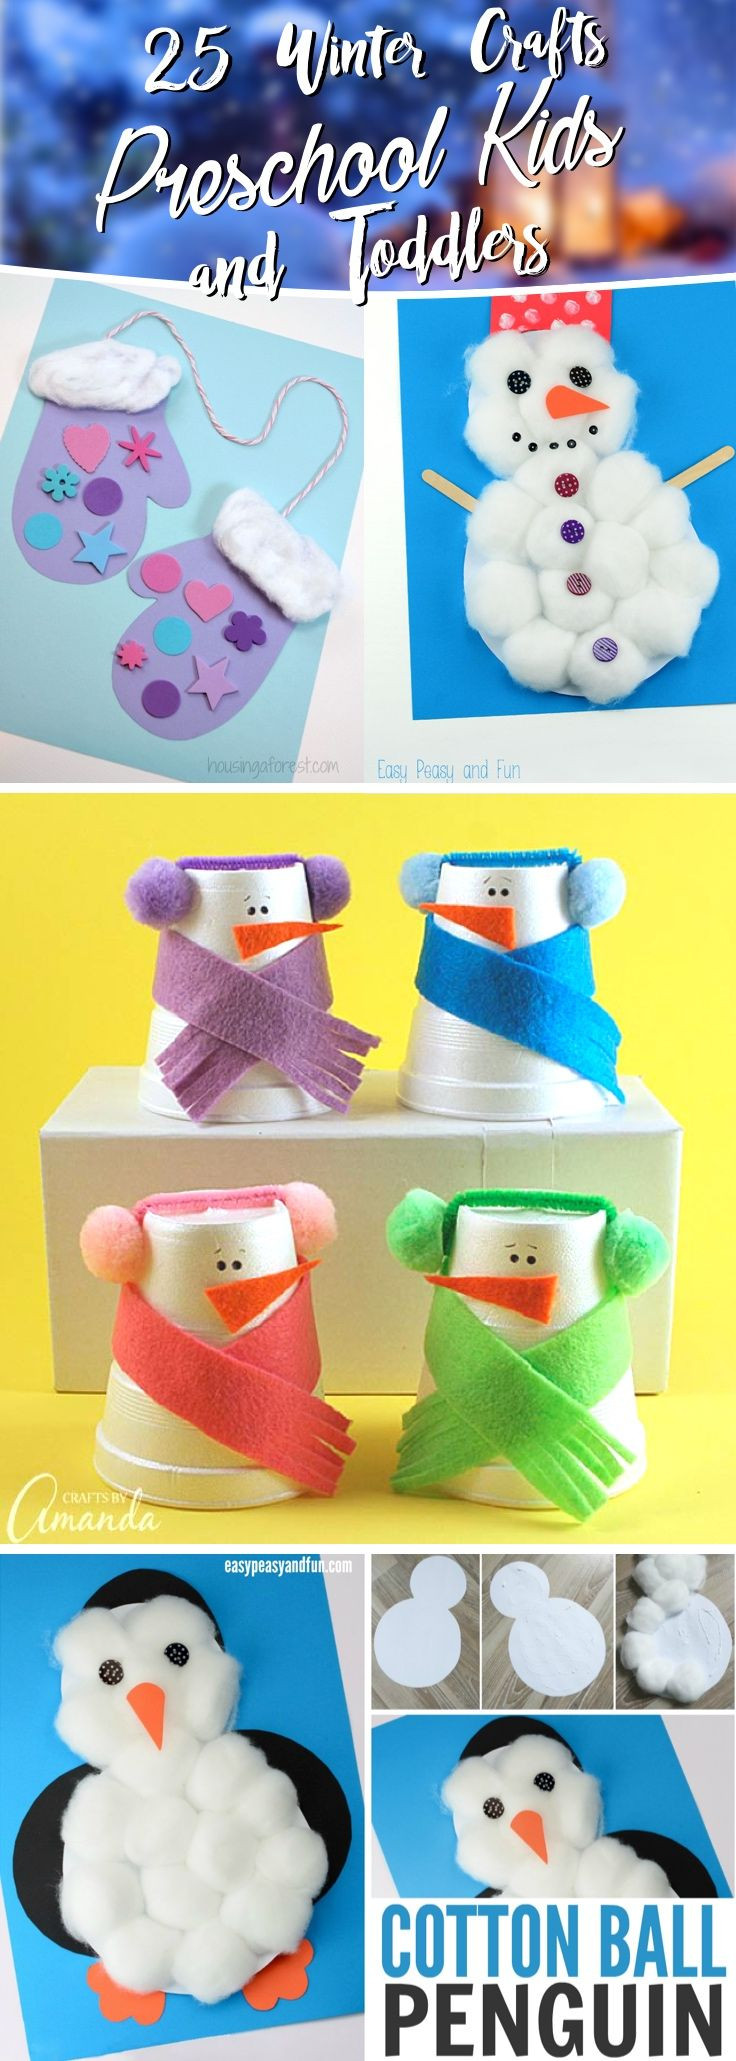 Winter Crafts Ideas For Preschoolers
 25 Winter Crafts Preschool Kids and Toddlers Are Going To